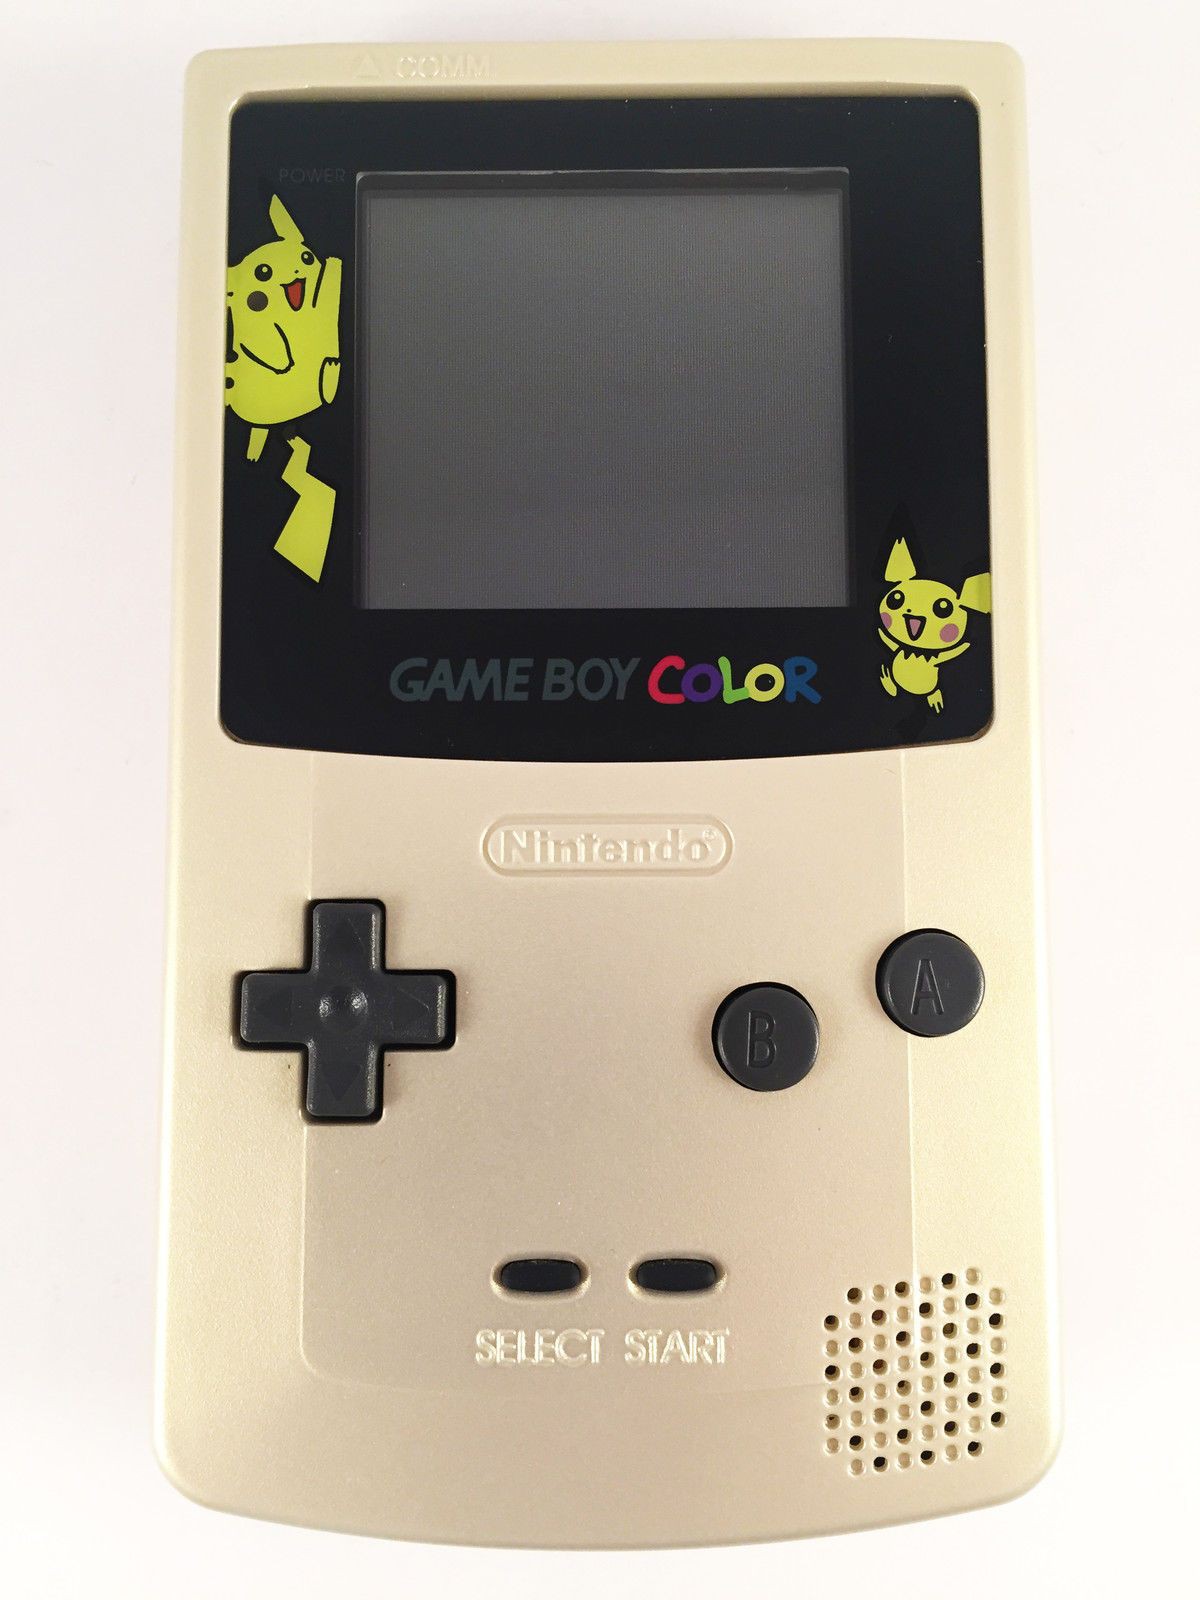 NINTENDO GAME BOY COLOR Gold Pokemon Edition Gameboy Colour FULLY REFURBISHED